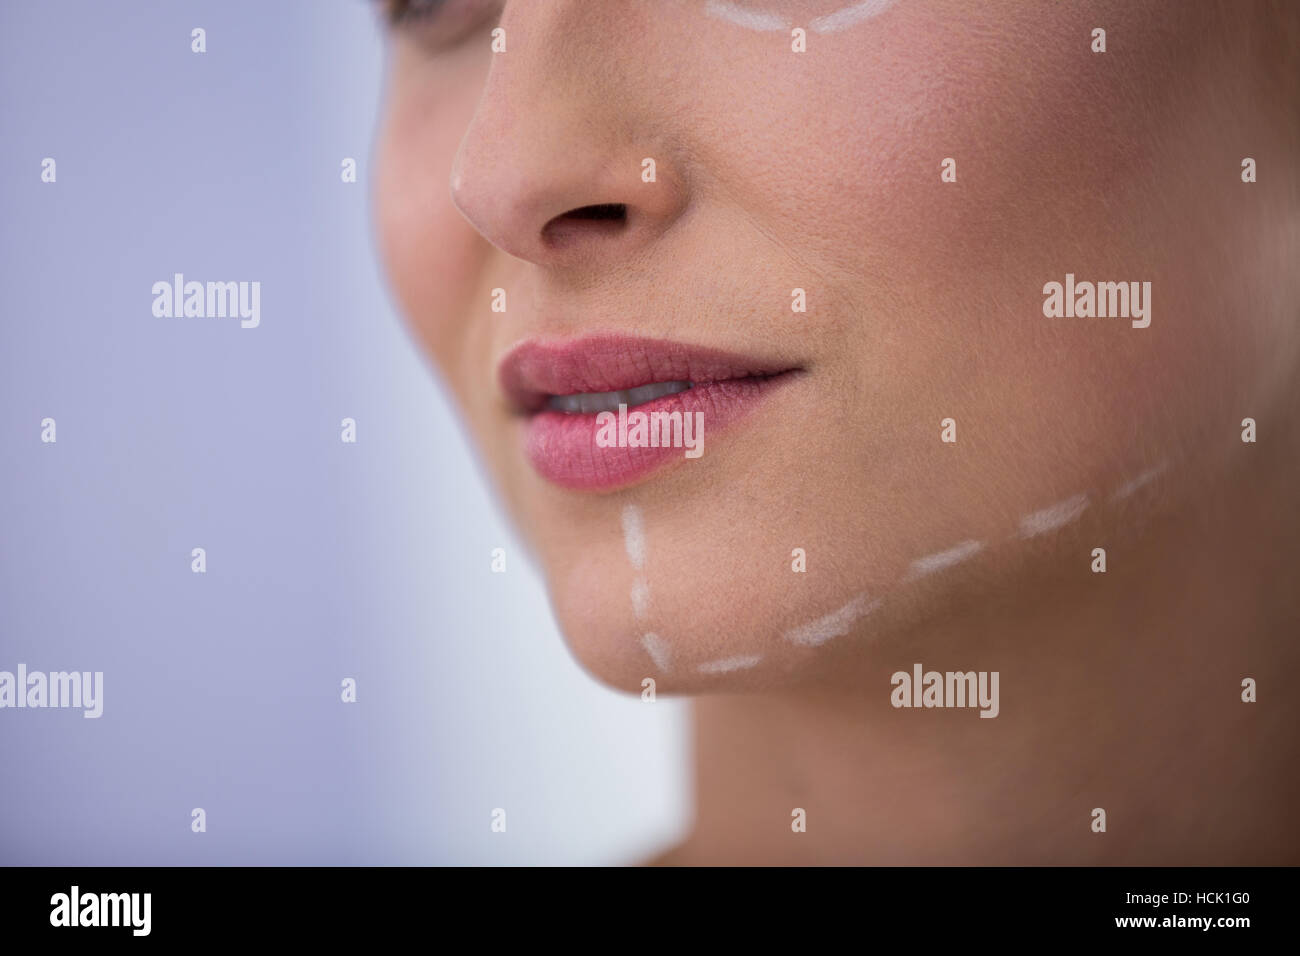 Woman with marks drawn for cosmetic treatment on her jaw Stock Photo